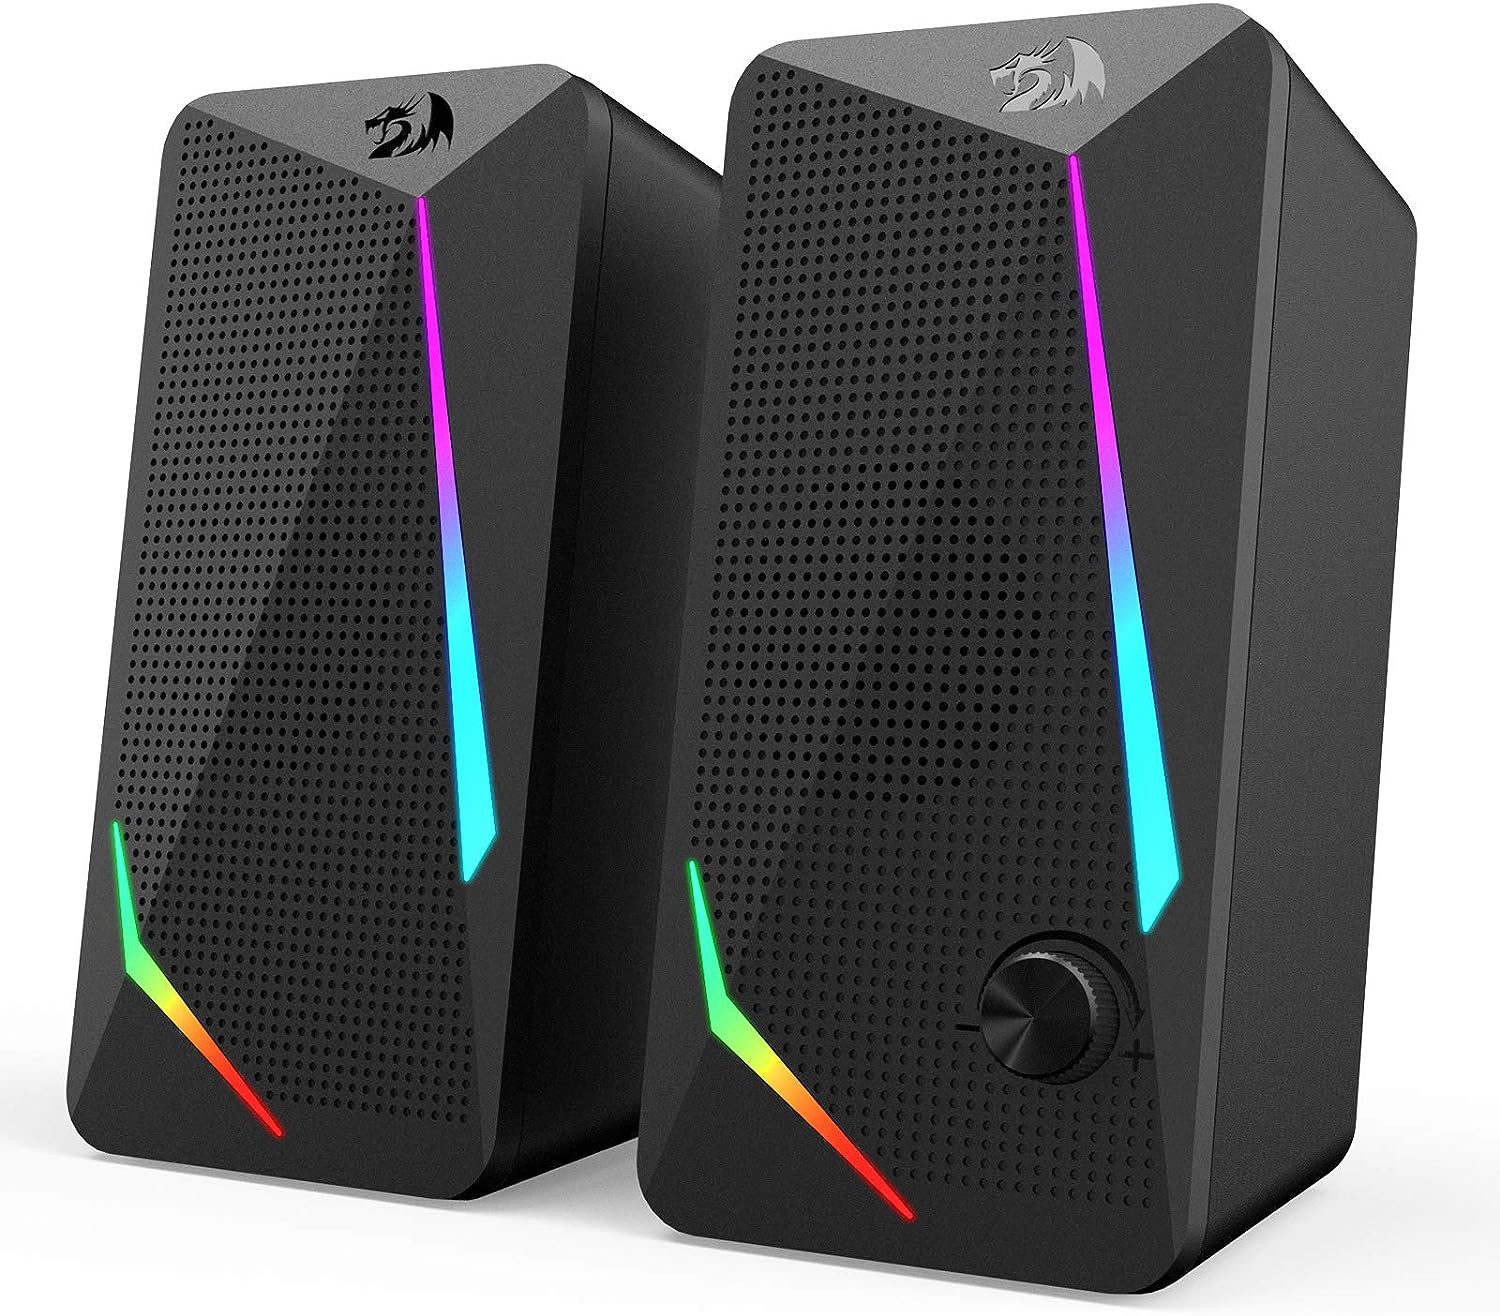 Redragon GS510 RGB Desktop Speakers, 2.0 Channel PC Computer Speaker with 4 Colorful LED Backlight Modes, Enhanced Bass and Easy-Access Volume Control, USB Powered w/ 3.5mm Cable